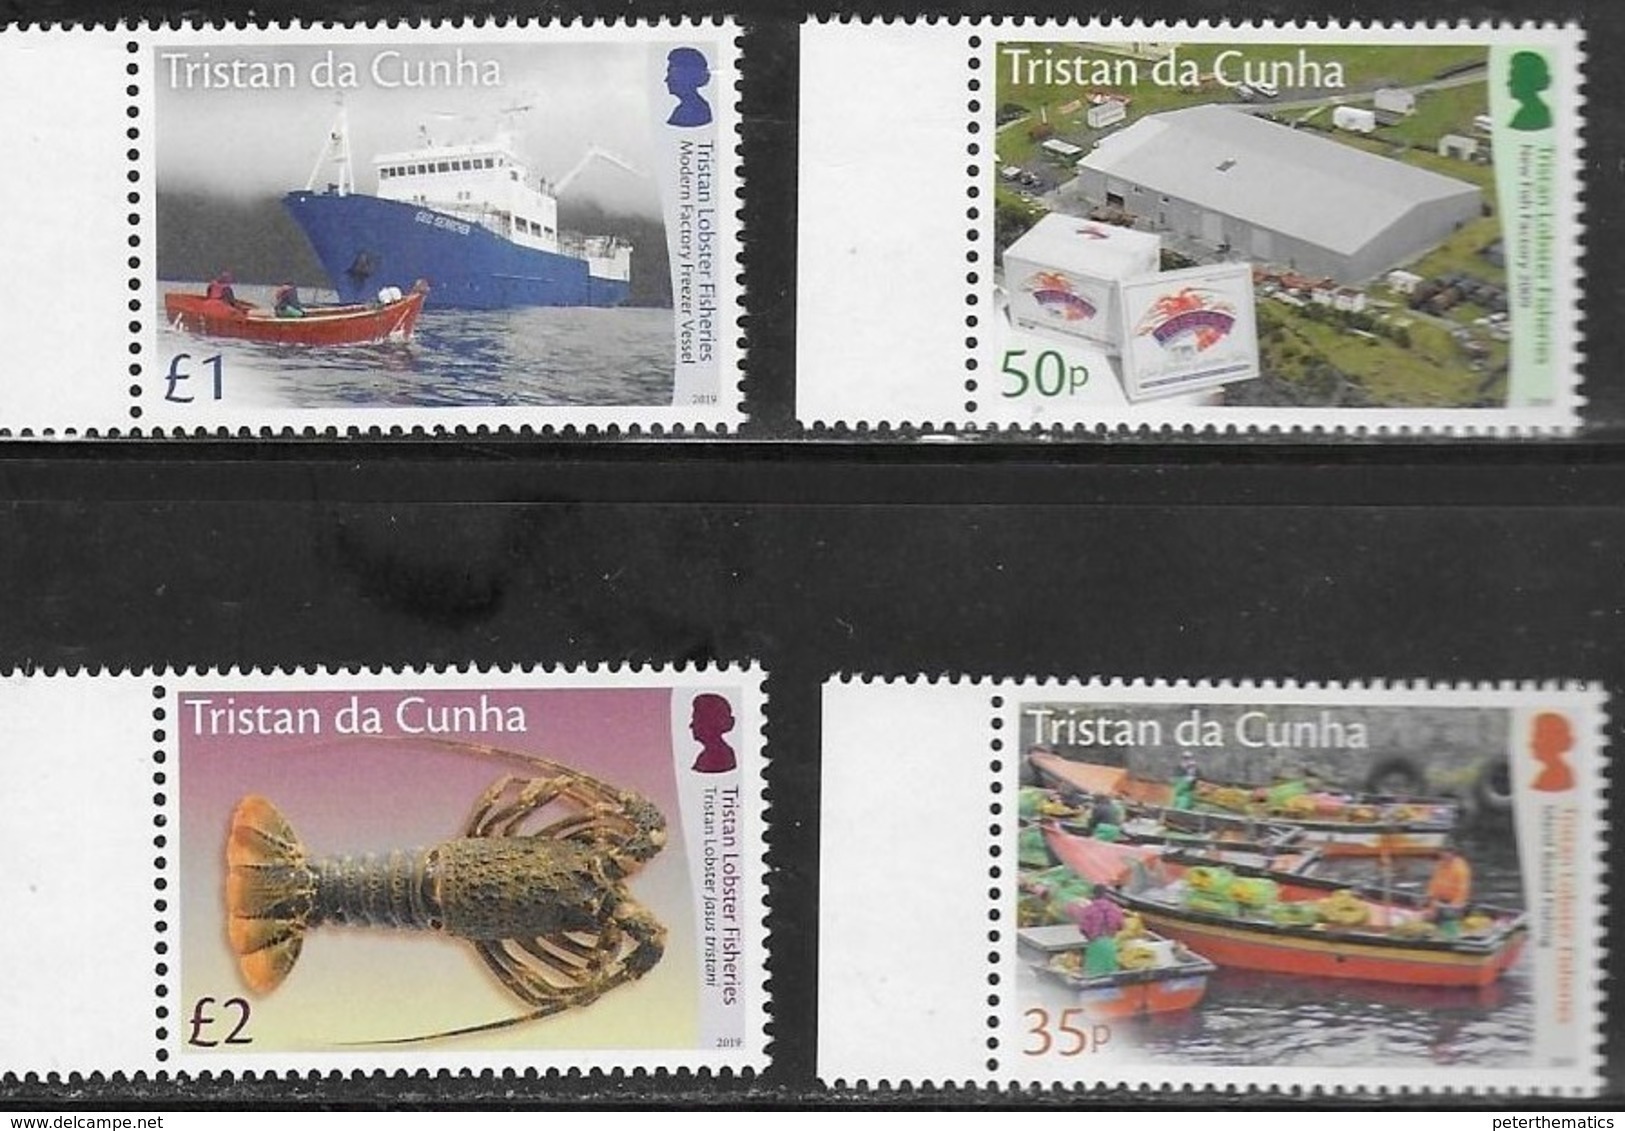 TRISTAN DA CUNHA, 2019, MNH, CRUSTACEANS, LOBSTERS, LOBSTE FISHERIES, BOATS, SHIPS, 4v - Crustaceans